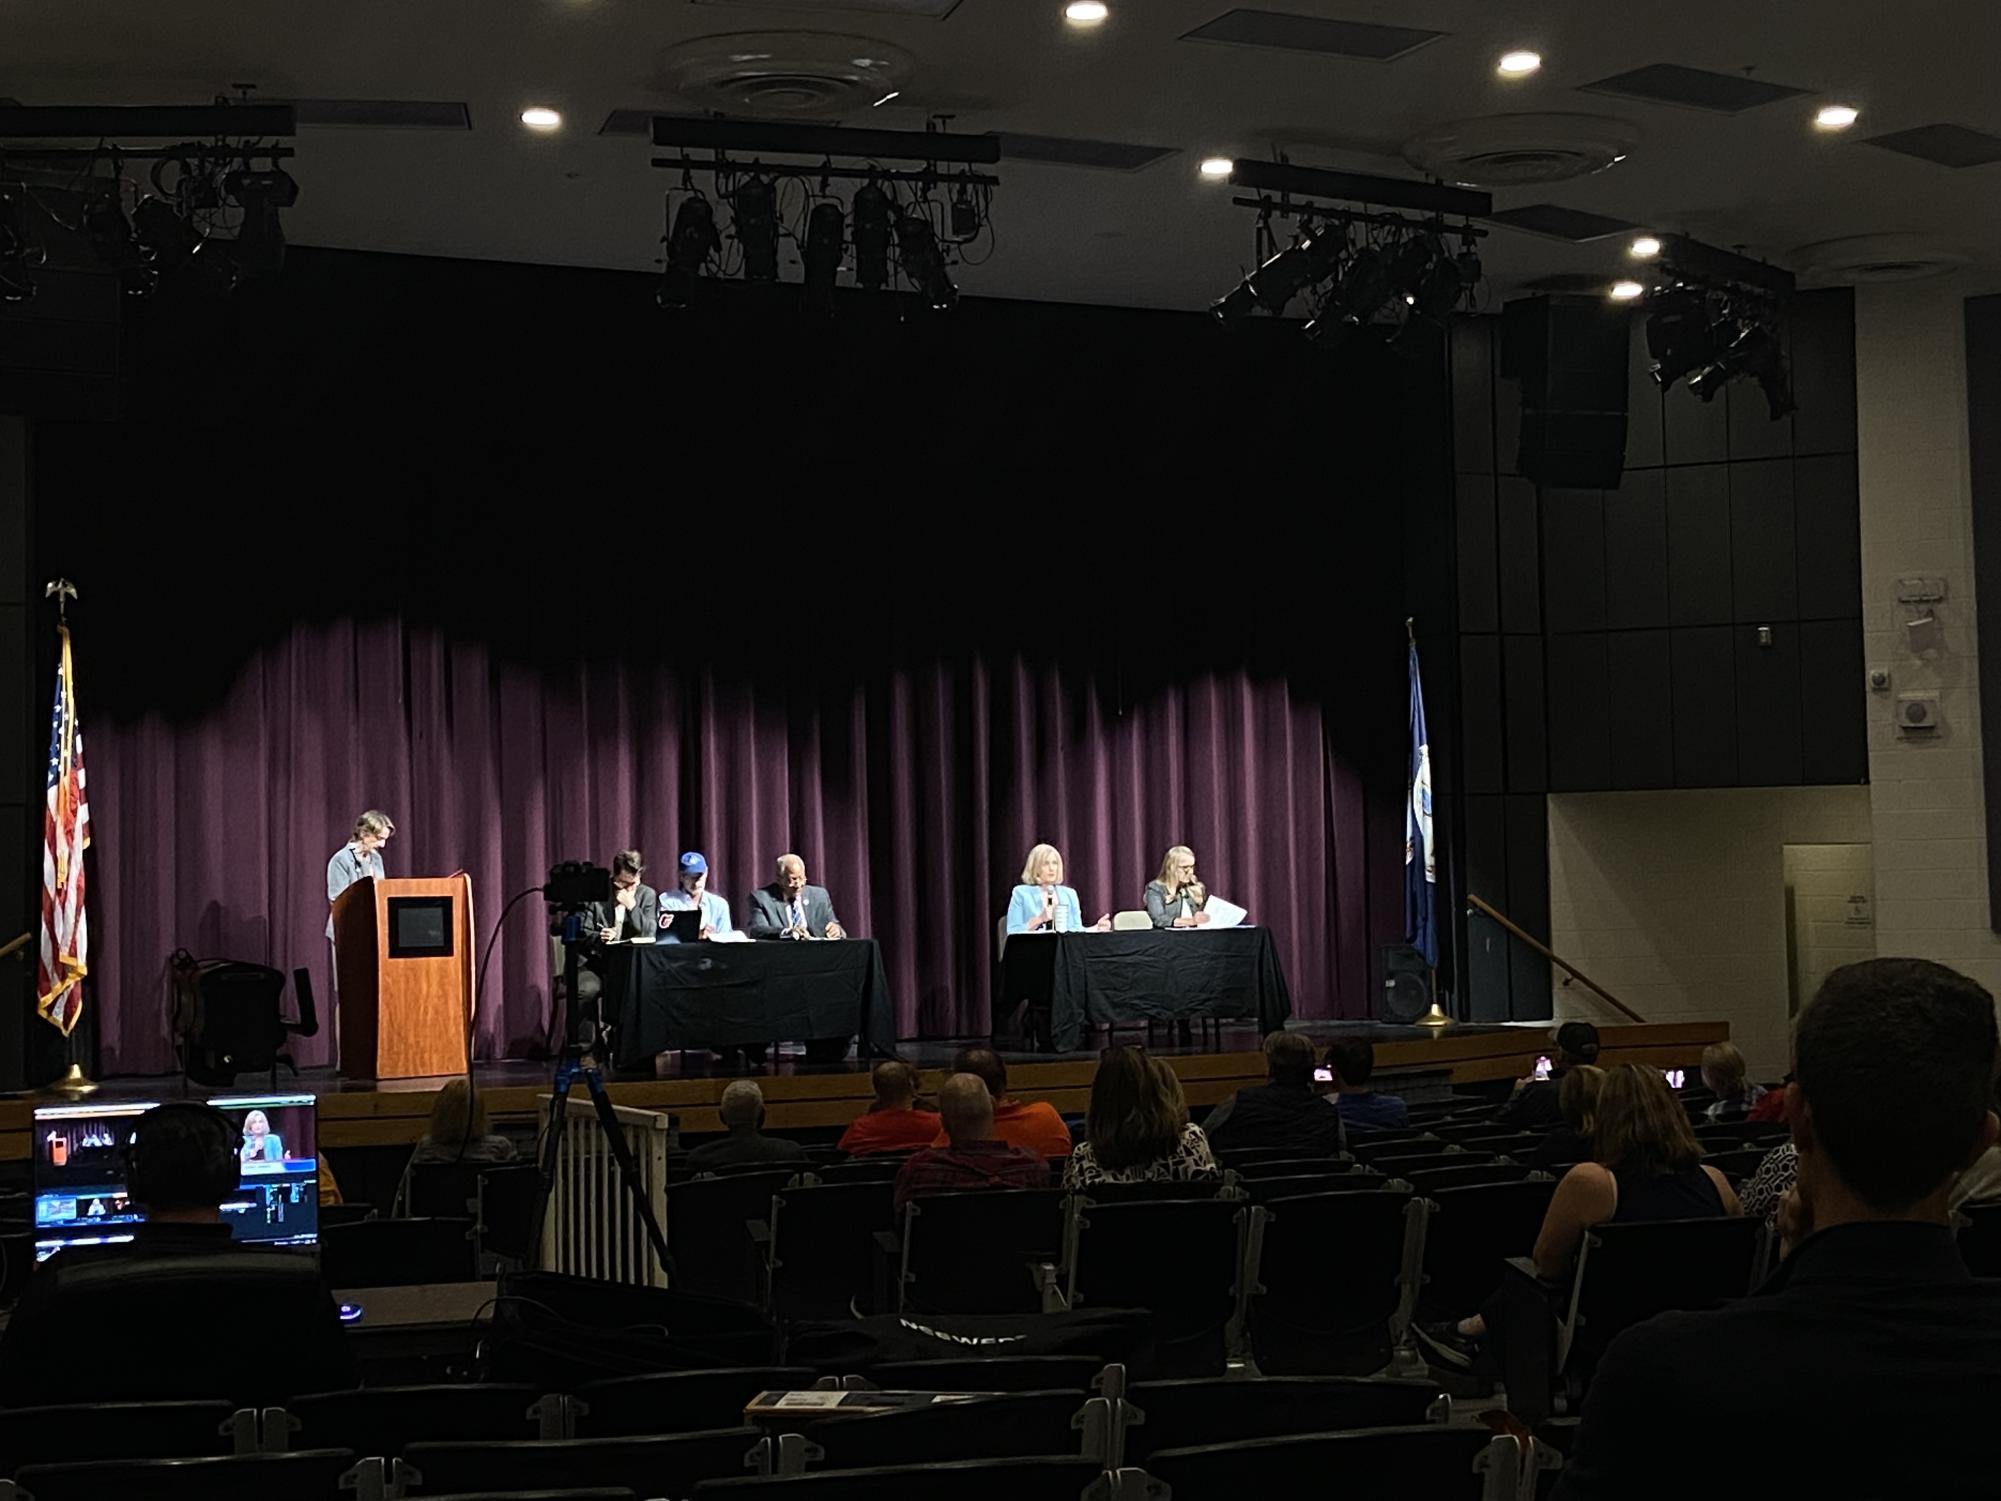 Candidates responded to questions from the panel which included mayor Stanley Milan of Purcellville and Editor-in-Chief of Loudoun Now Norman Styer.